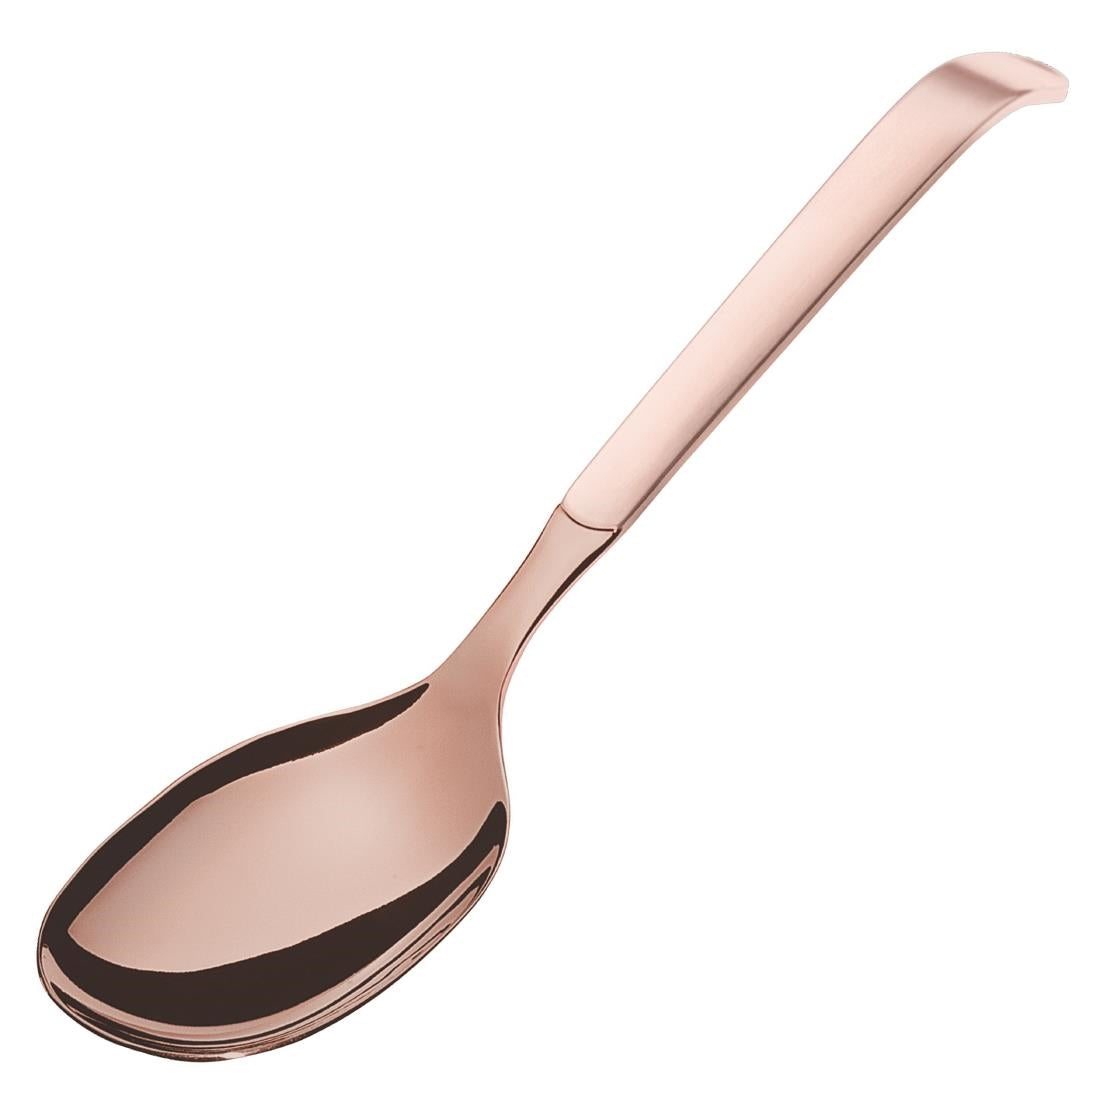 DX651 Amefa Buffet Small Serving Spoon Copper (Pack of 6)